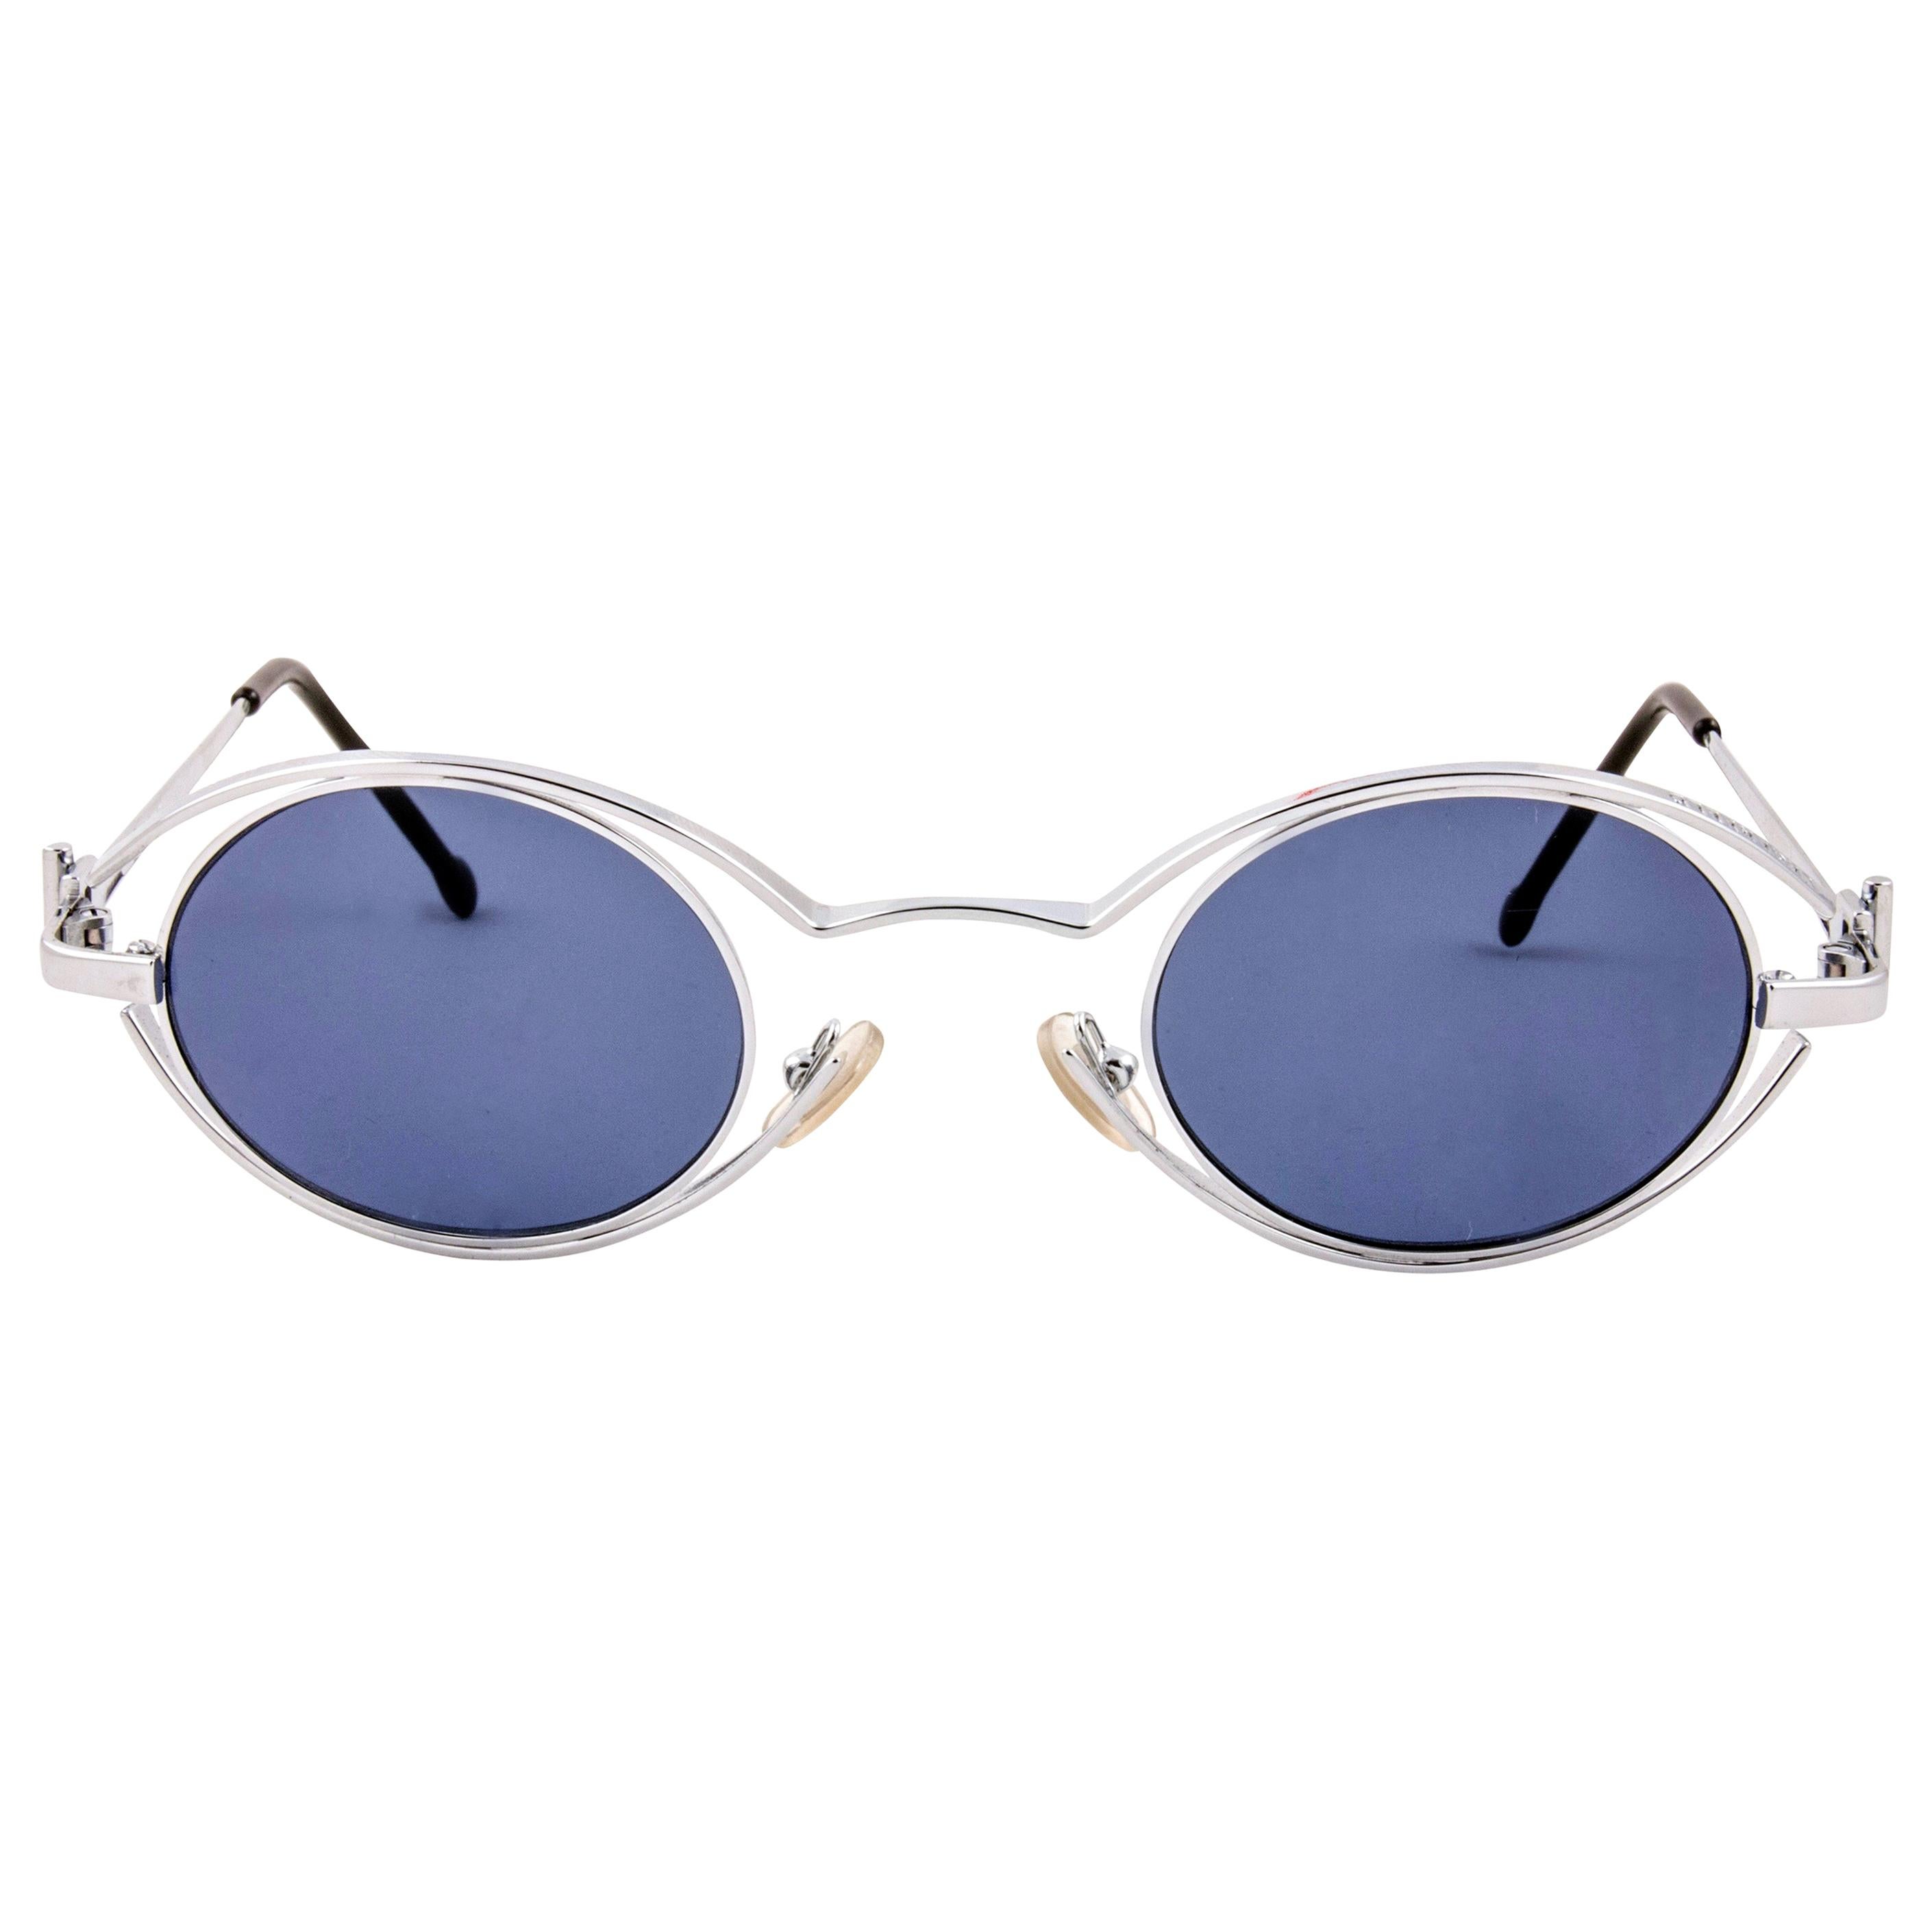 New Vintage Karl Lagerfeld 4123 04 Oval Silver 1990 France Sunglasses For Sale